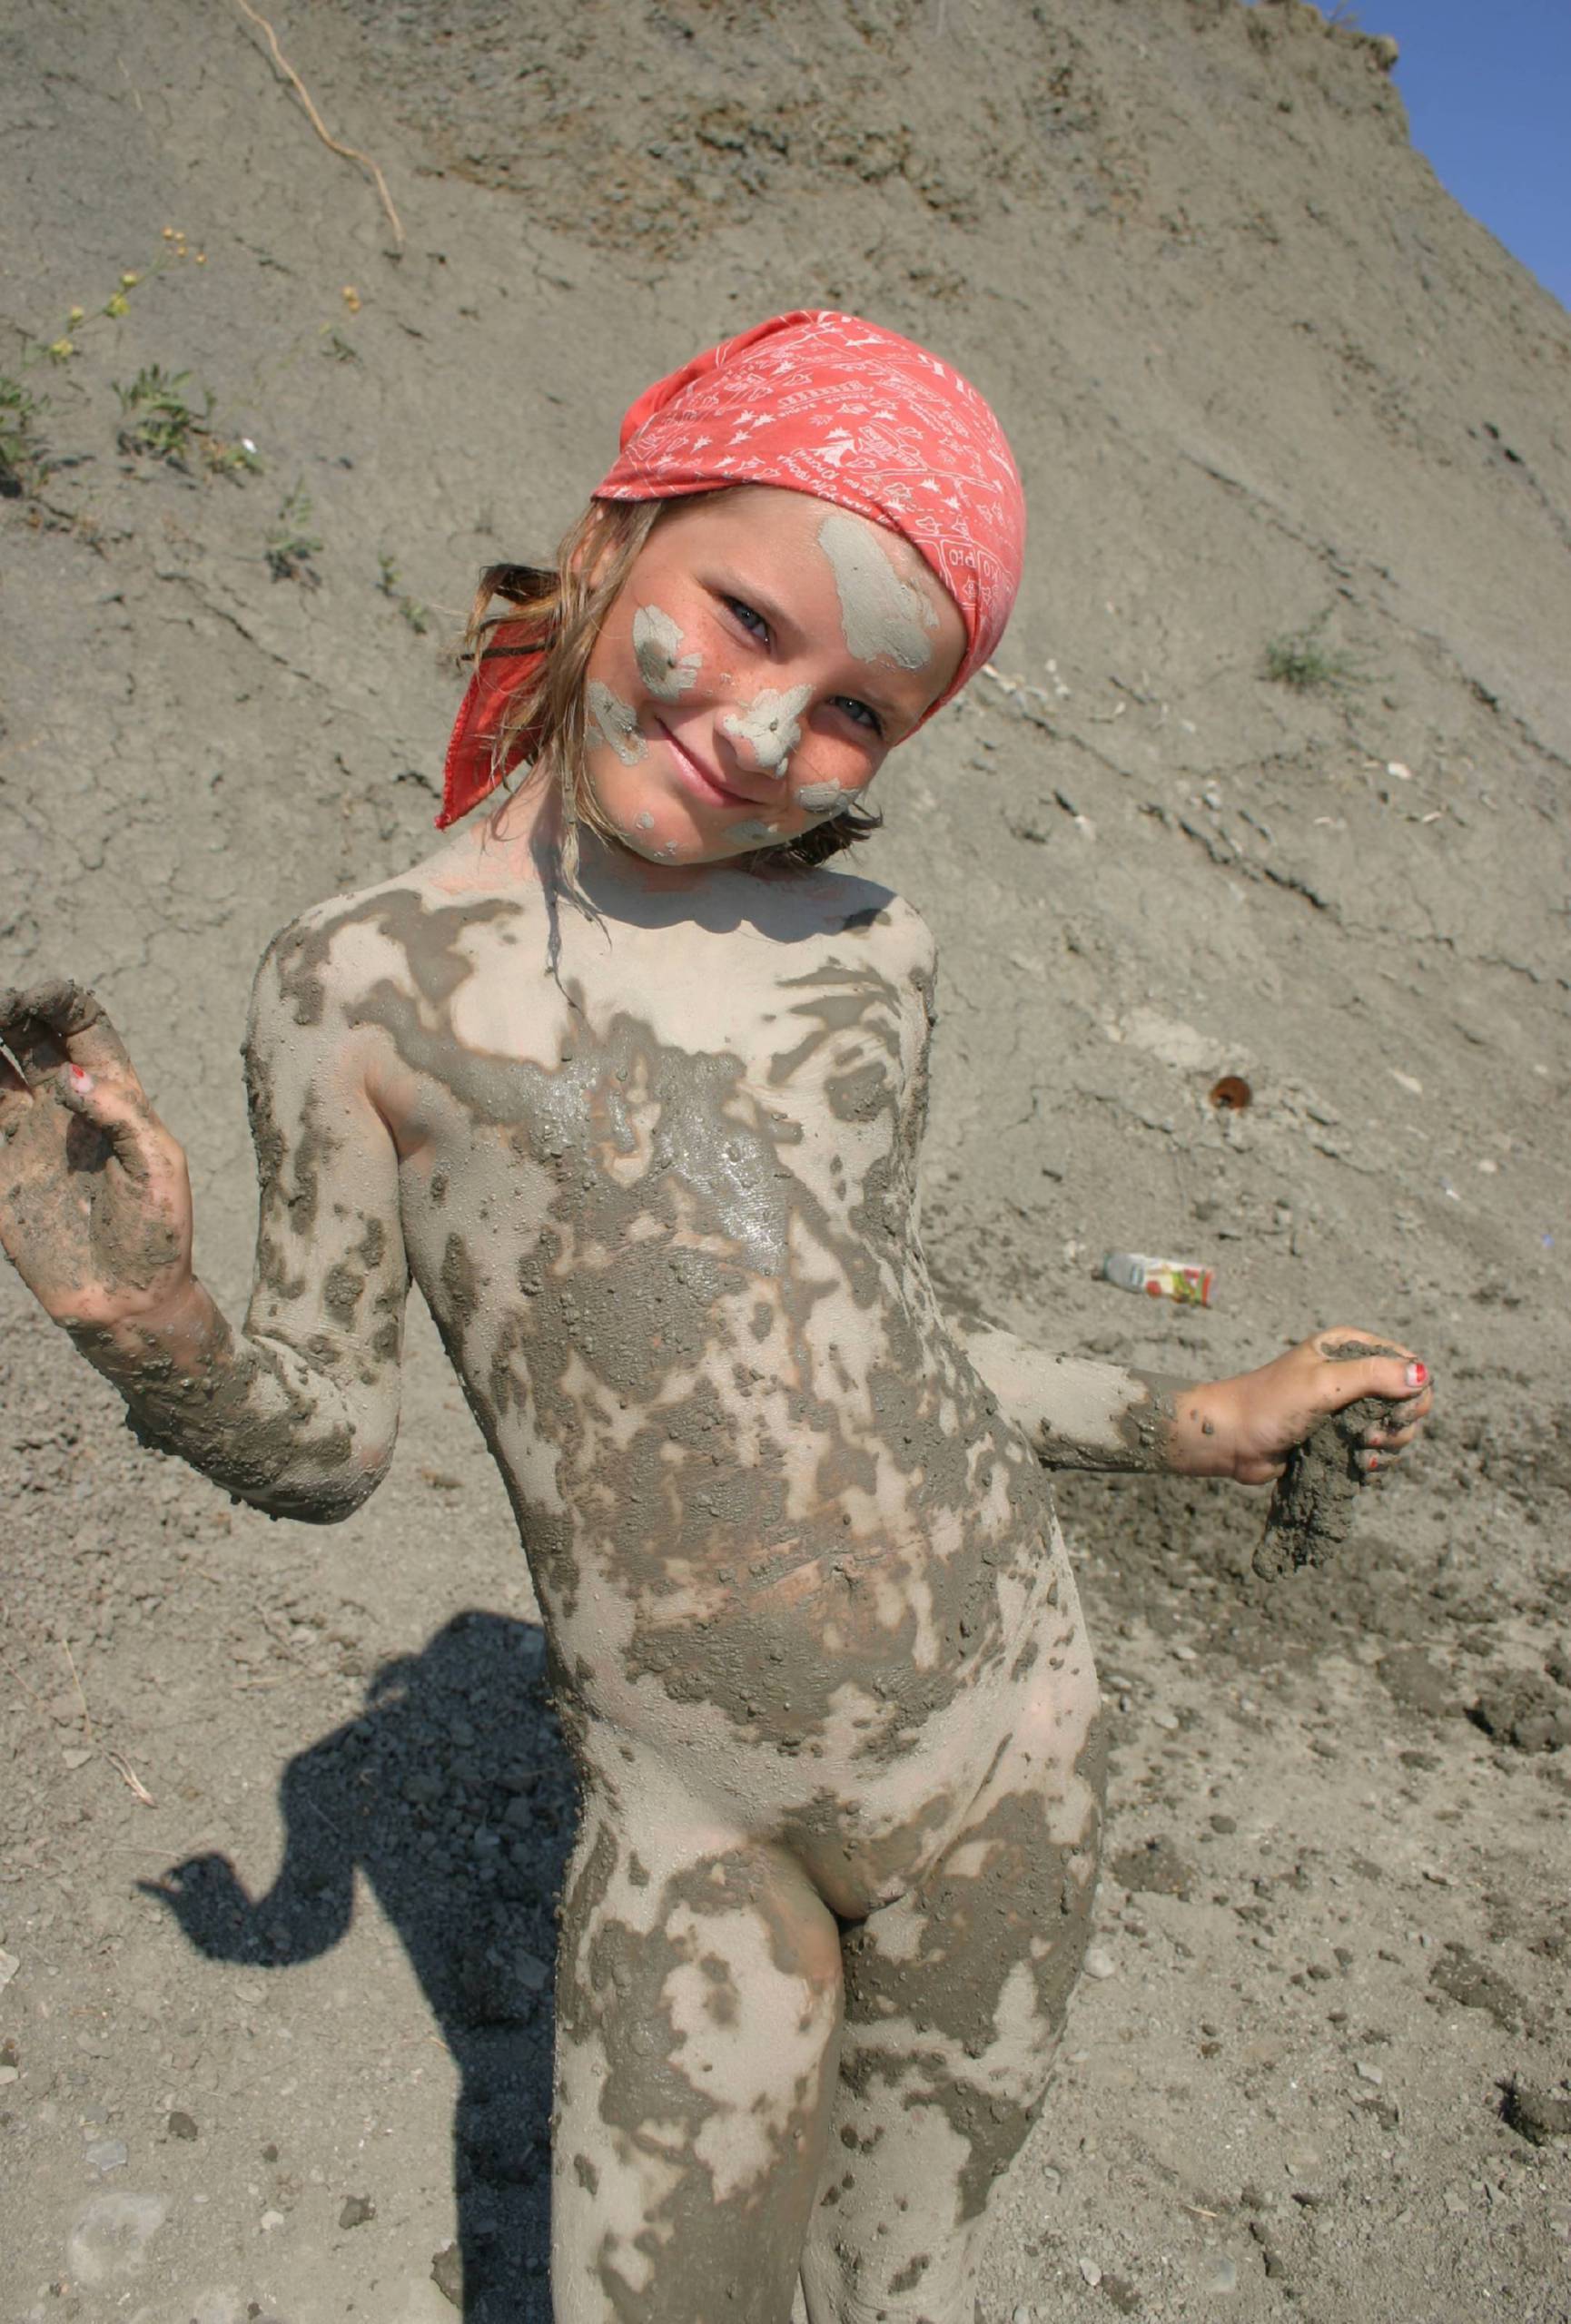 Pure Nudism Images Mud Sculpture on Shores - 2